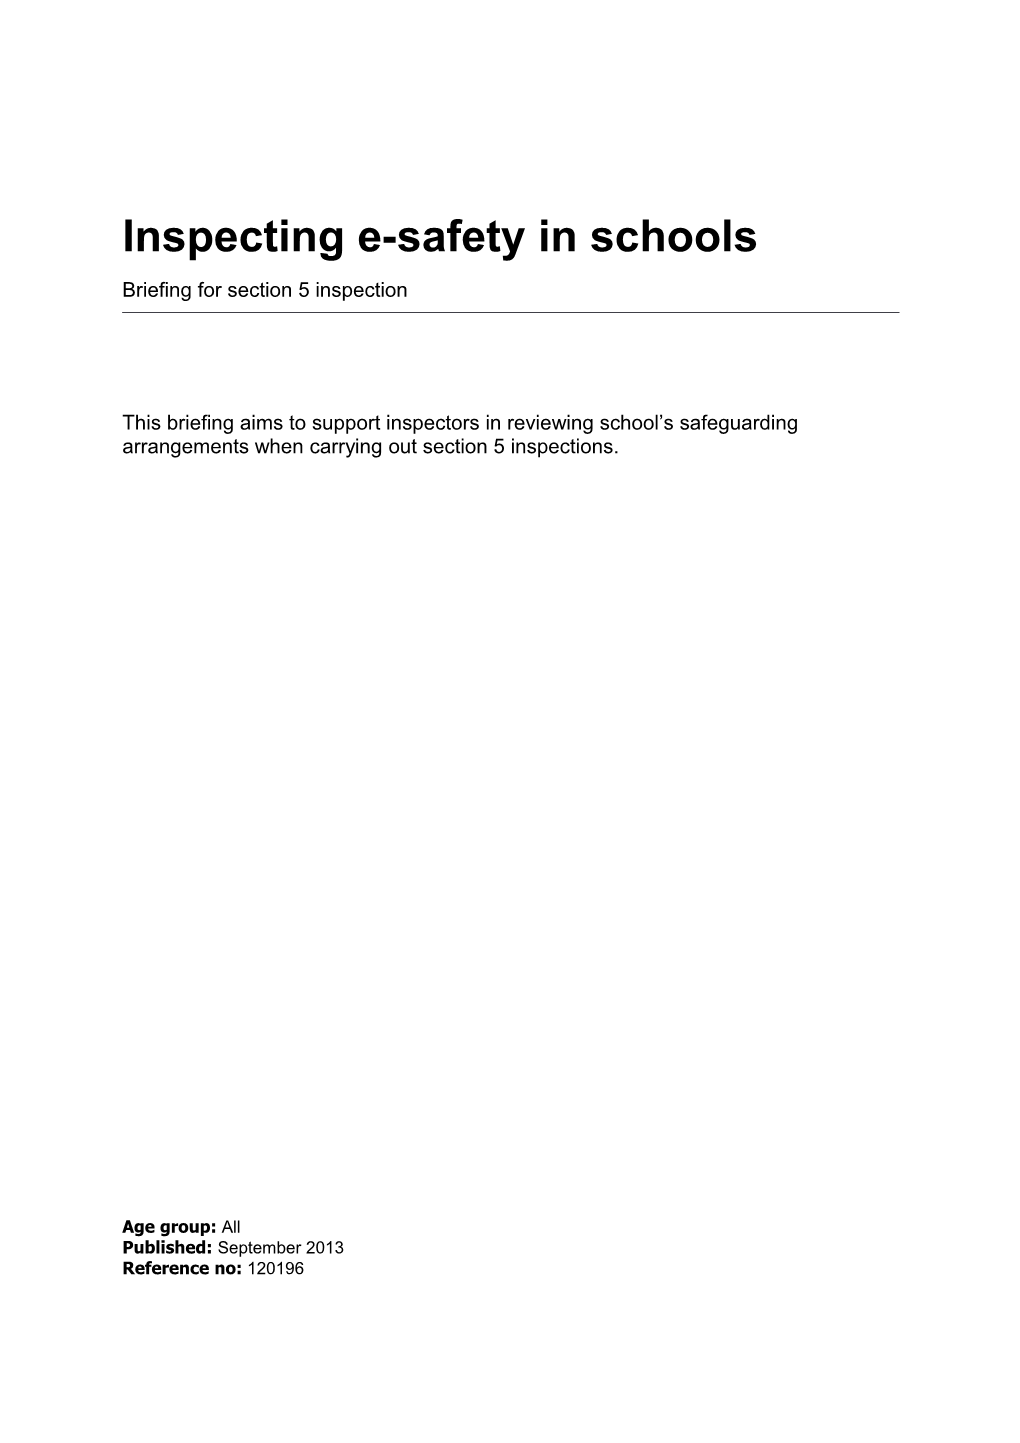 Ofsted Template - with Summary, Contents and Copyright